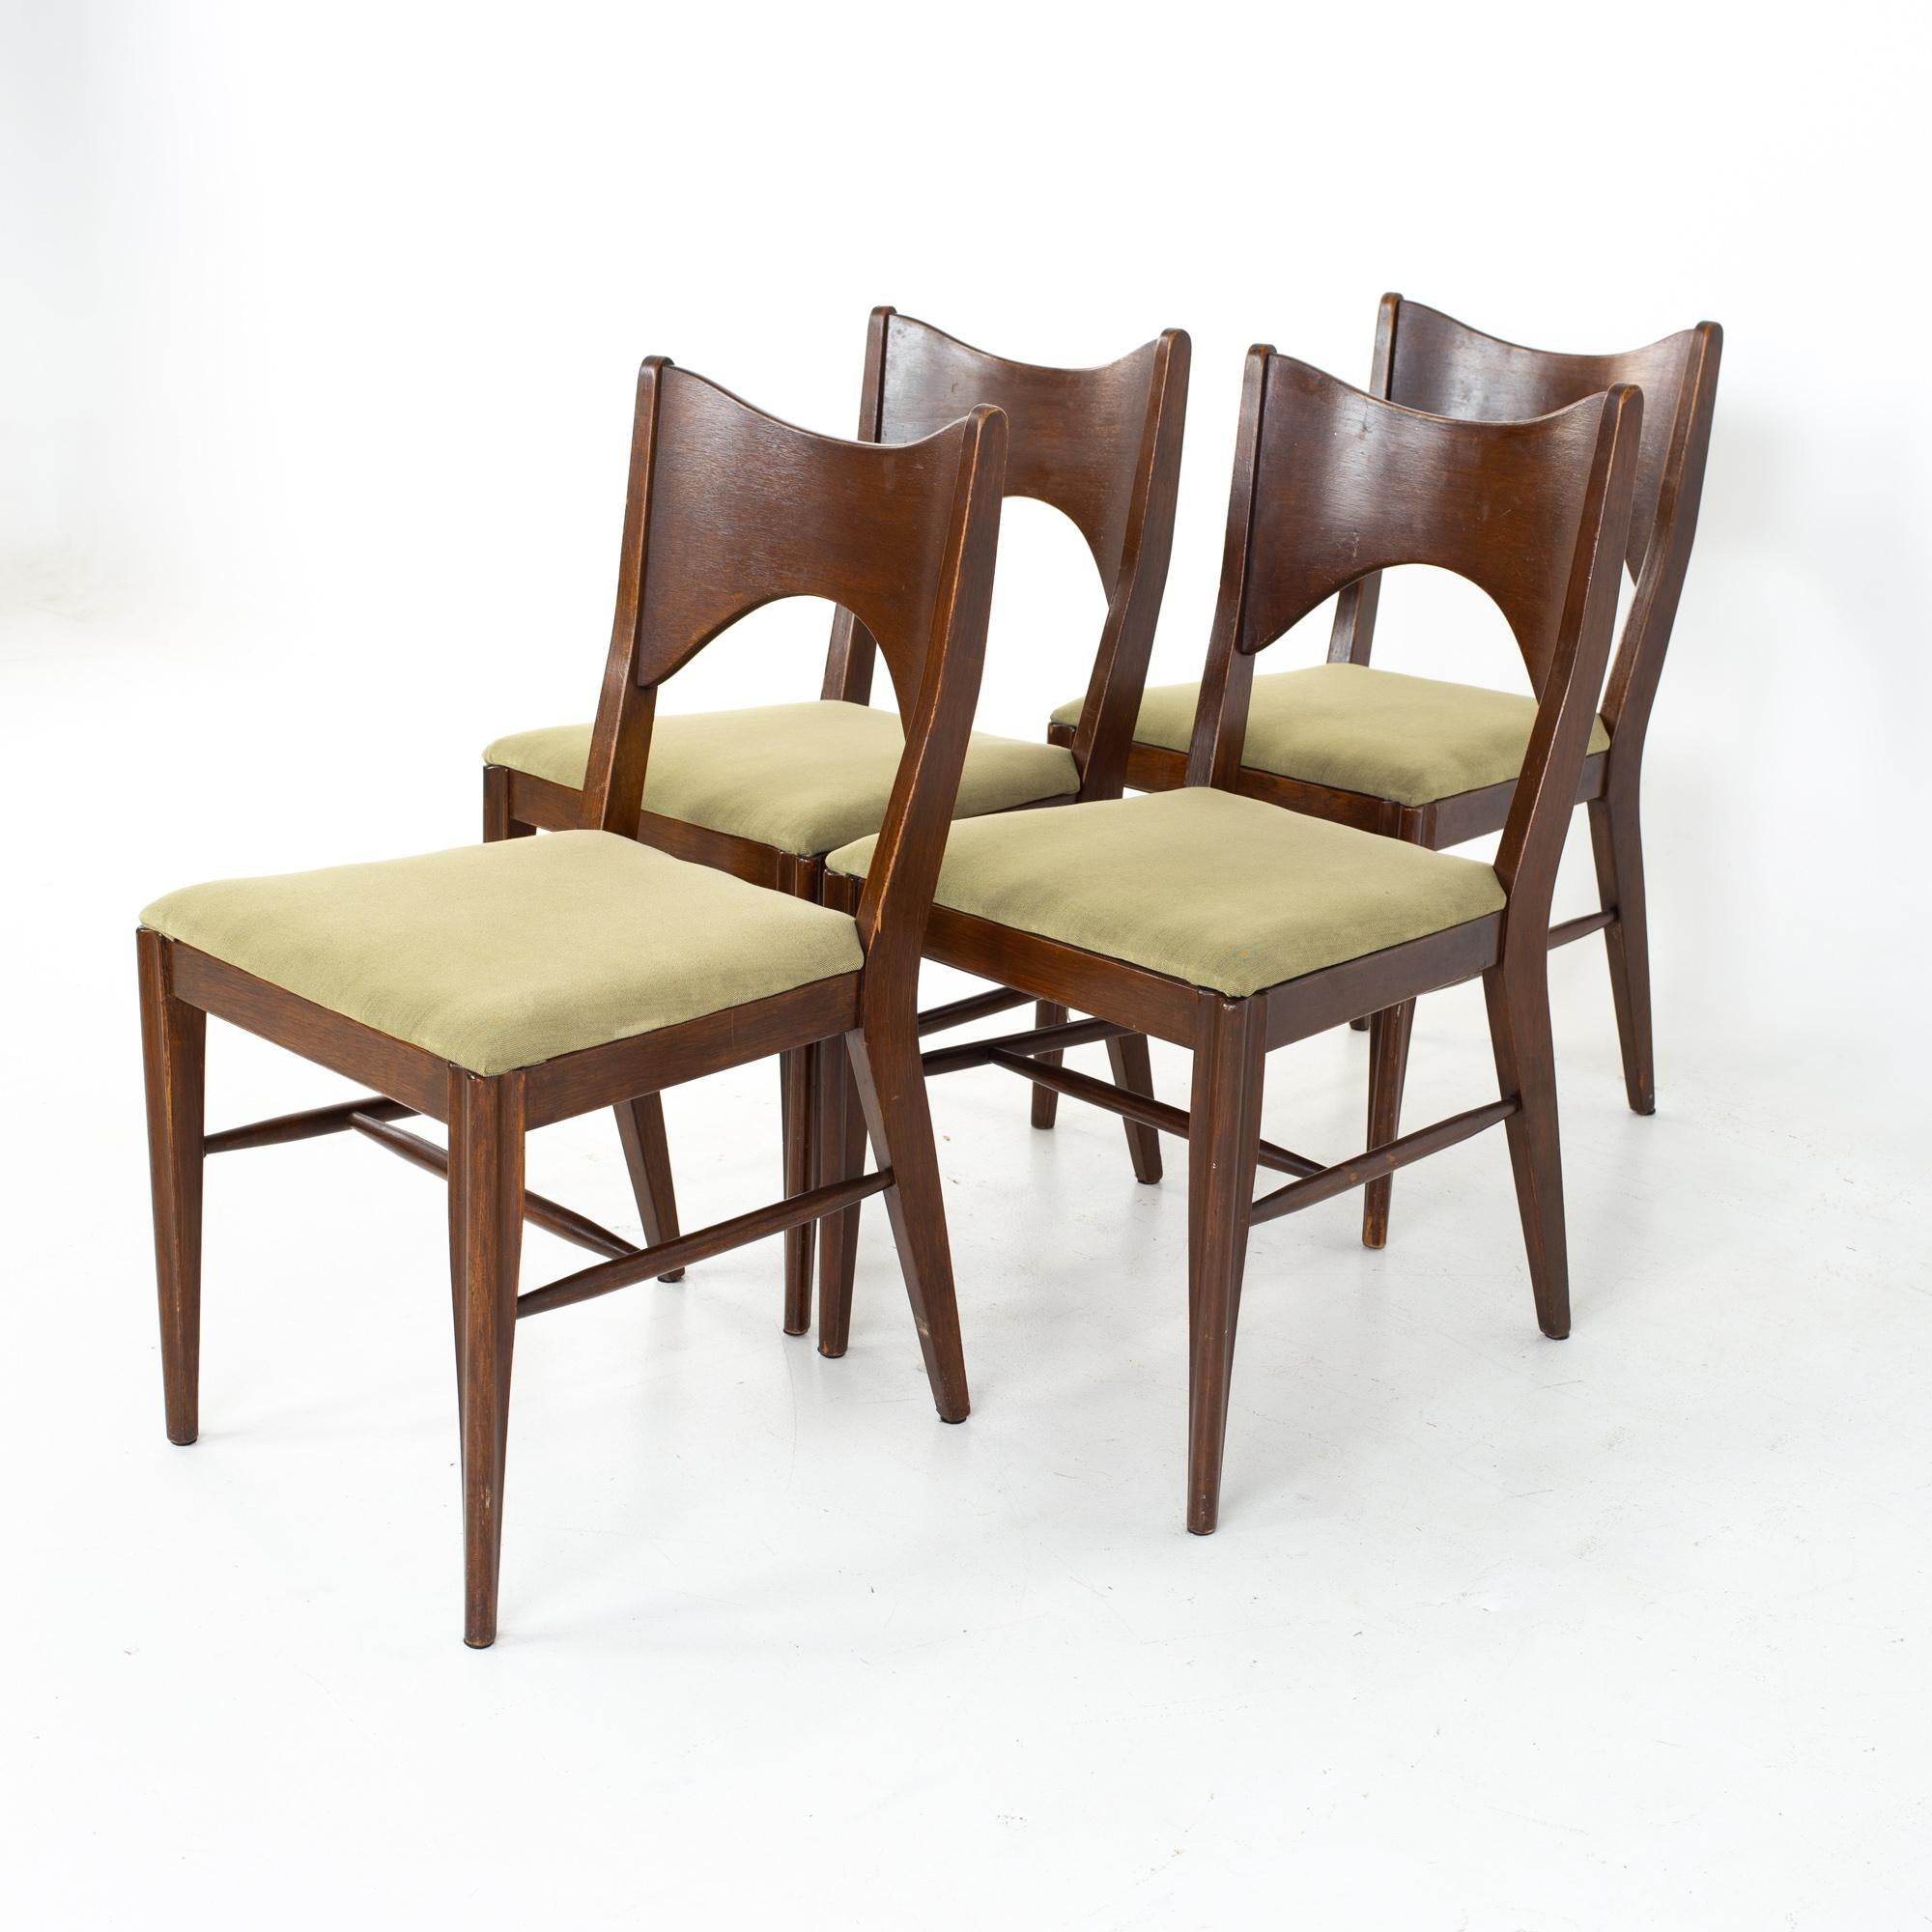 Broyhill Saga Mid Century dining chairs, set of 4
Each chair measures: 19.25 wide x 21.75 deep x 34 high, with a seat height of 18.25 and table clearance of 18.25

All pieces of furniture can be had in what we call restored vintage condition.